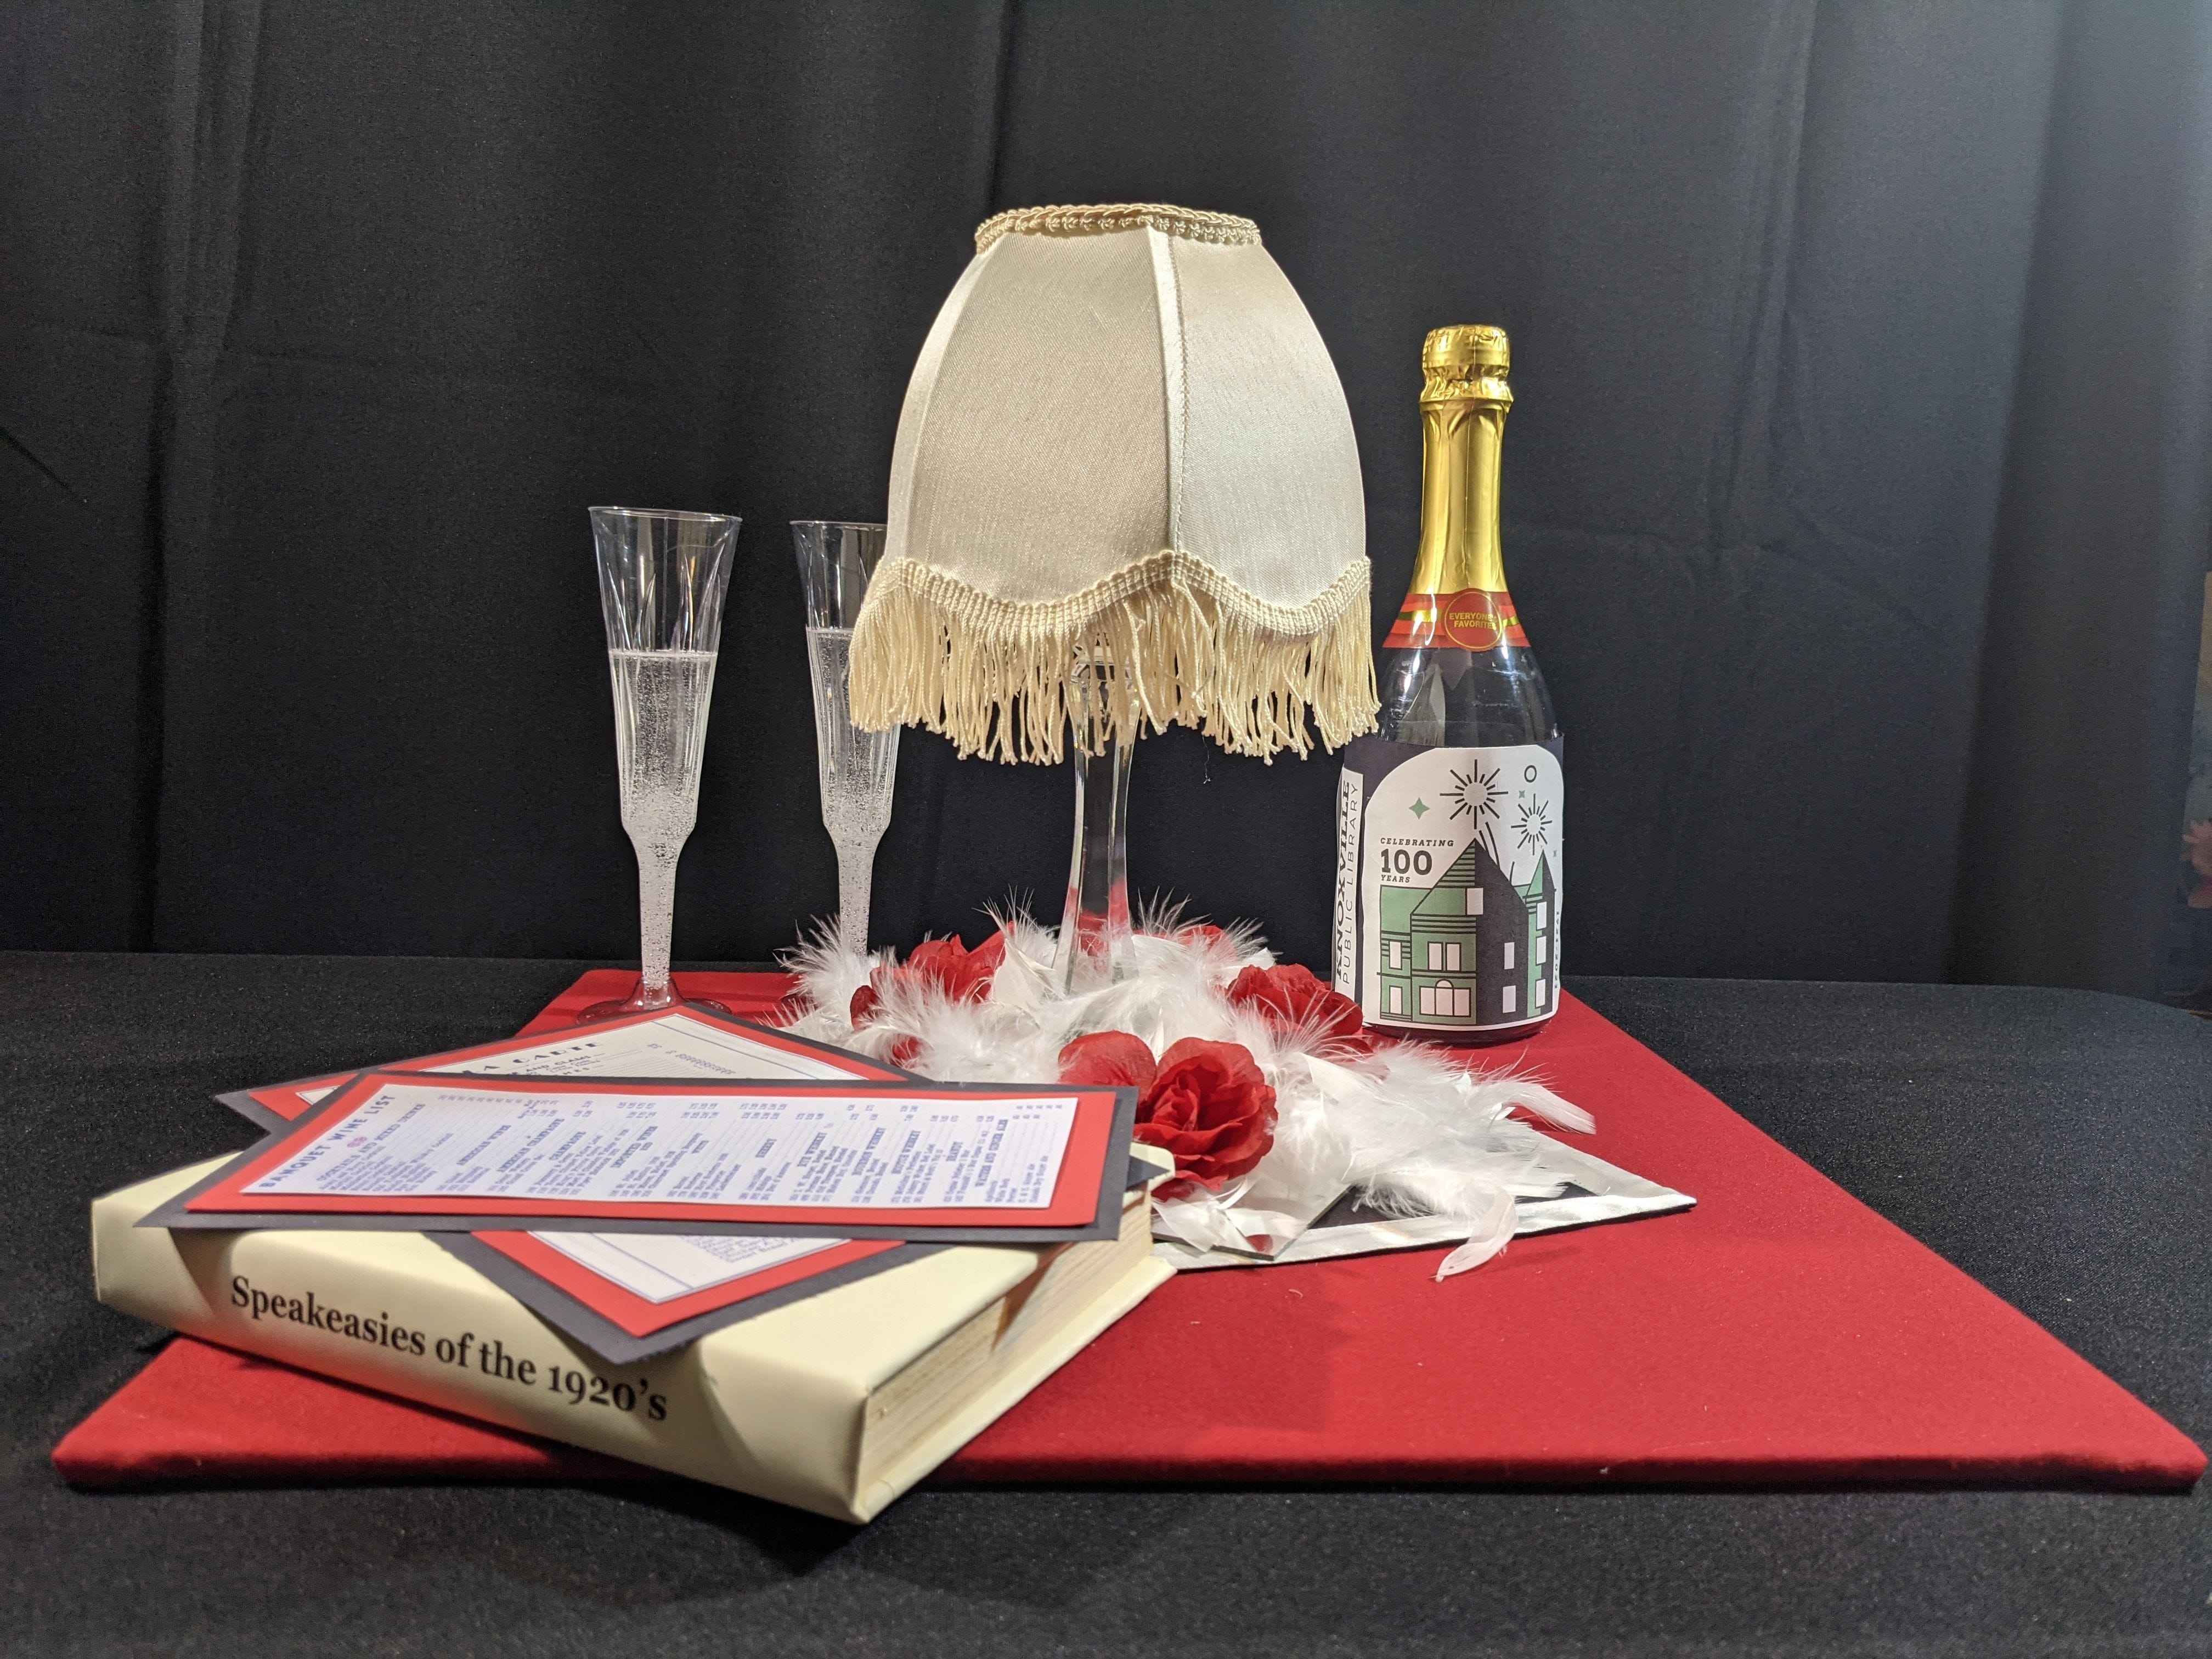 Book and Lamp Centerpiece